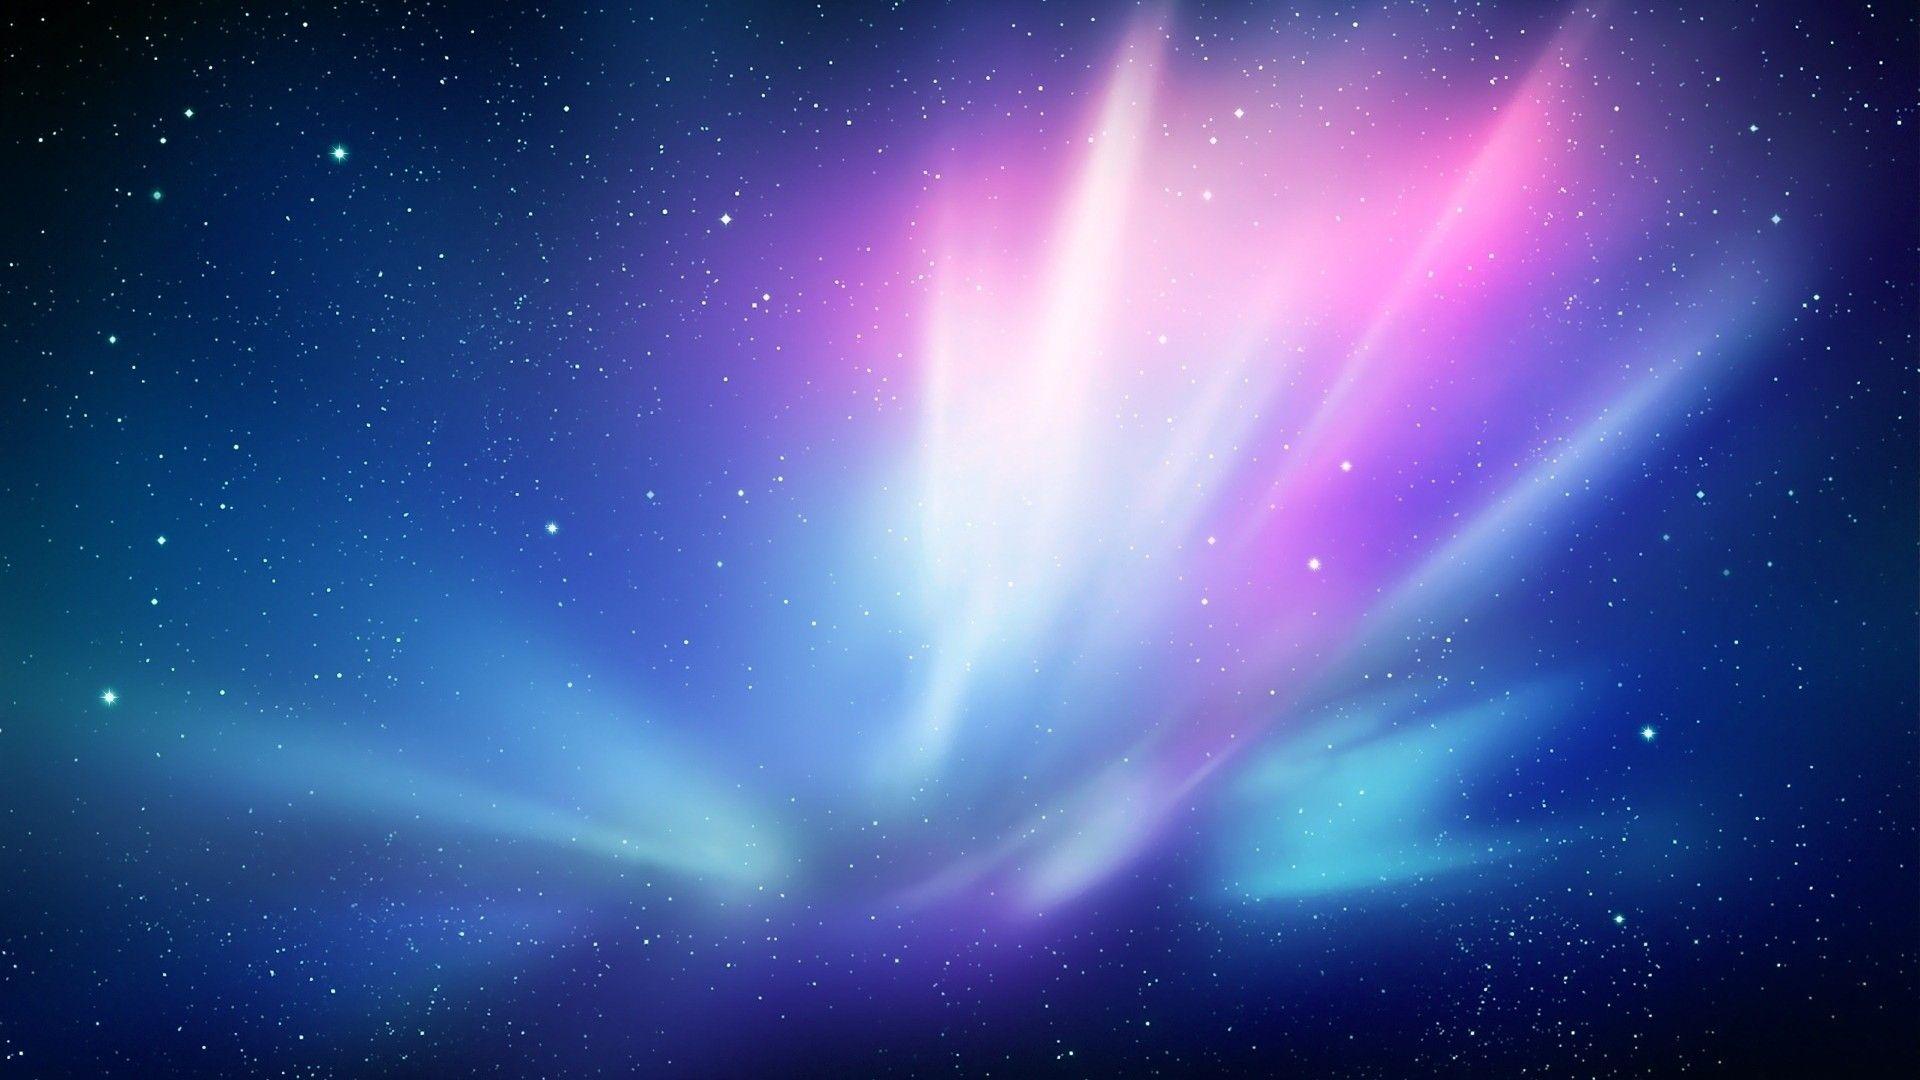 Blue Galaxy Wallpapers - Top Free Blue Galaxy Backgrounds ...